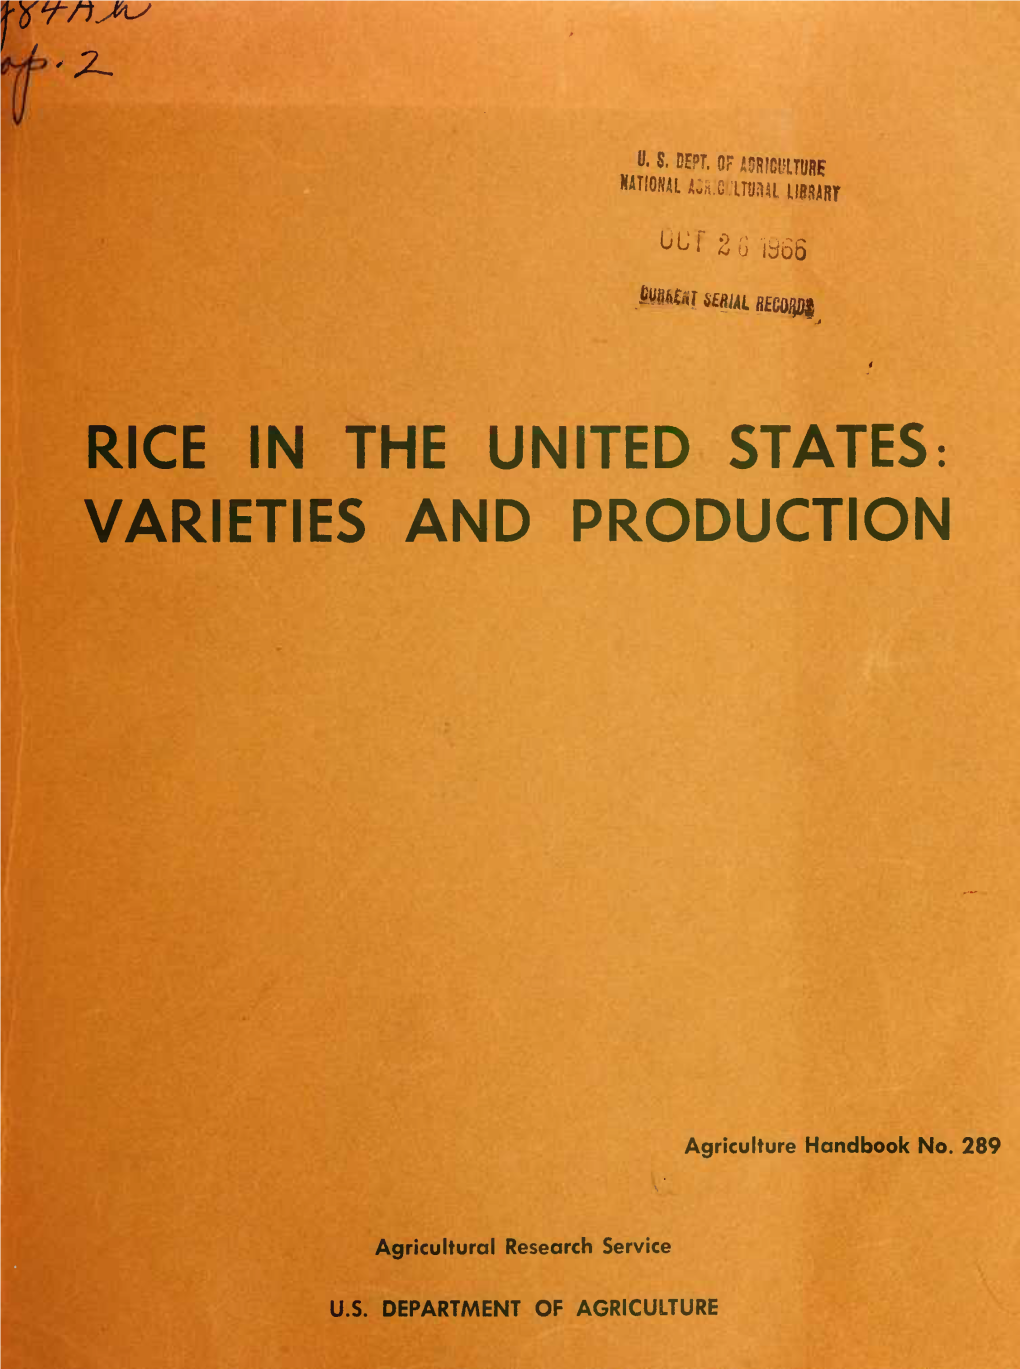 Varieties and Production